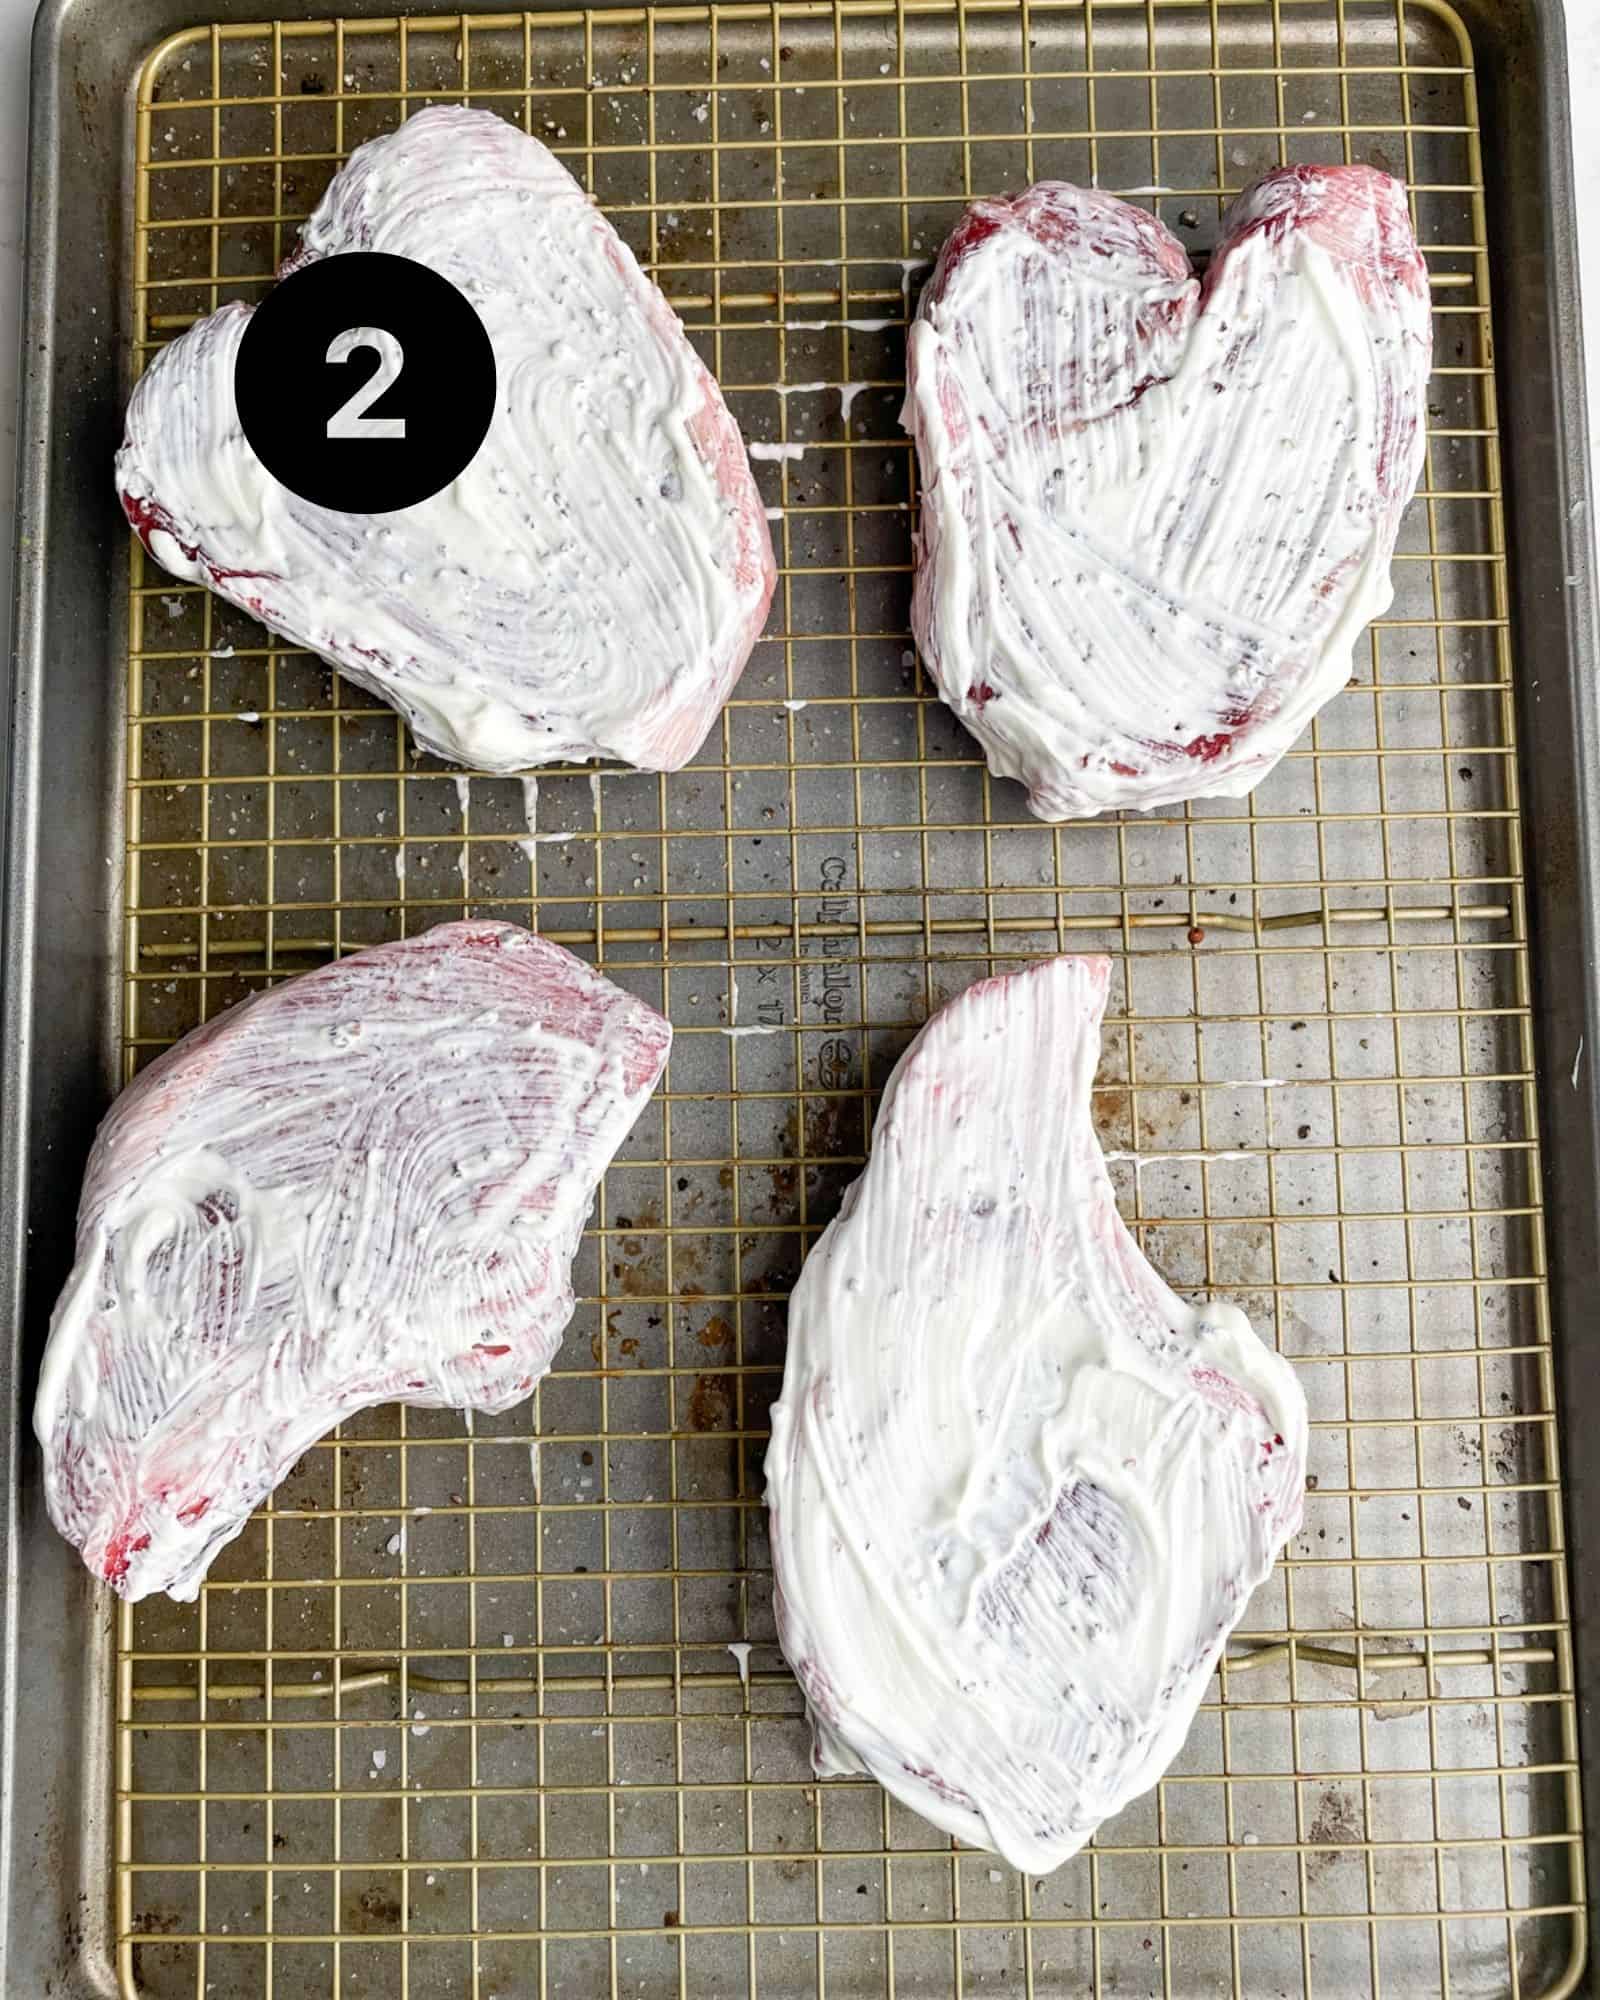 pork chops on a sheet pan with sour cream spread on top.